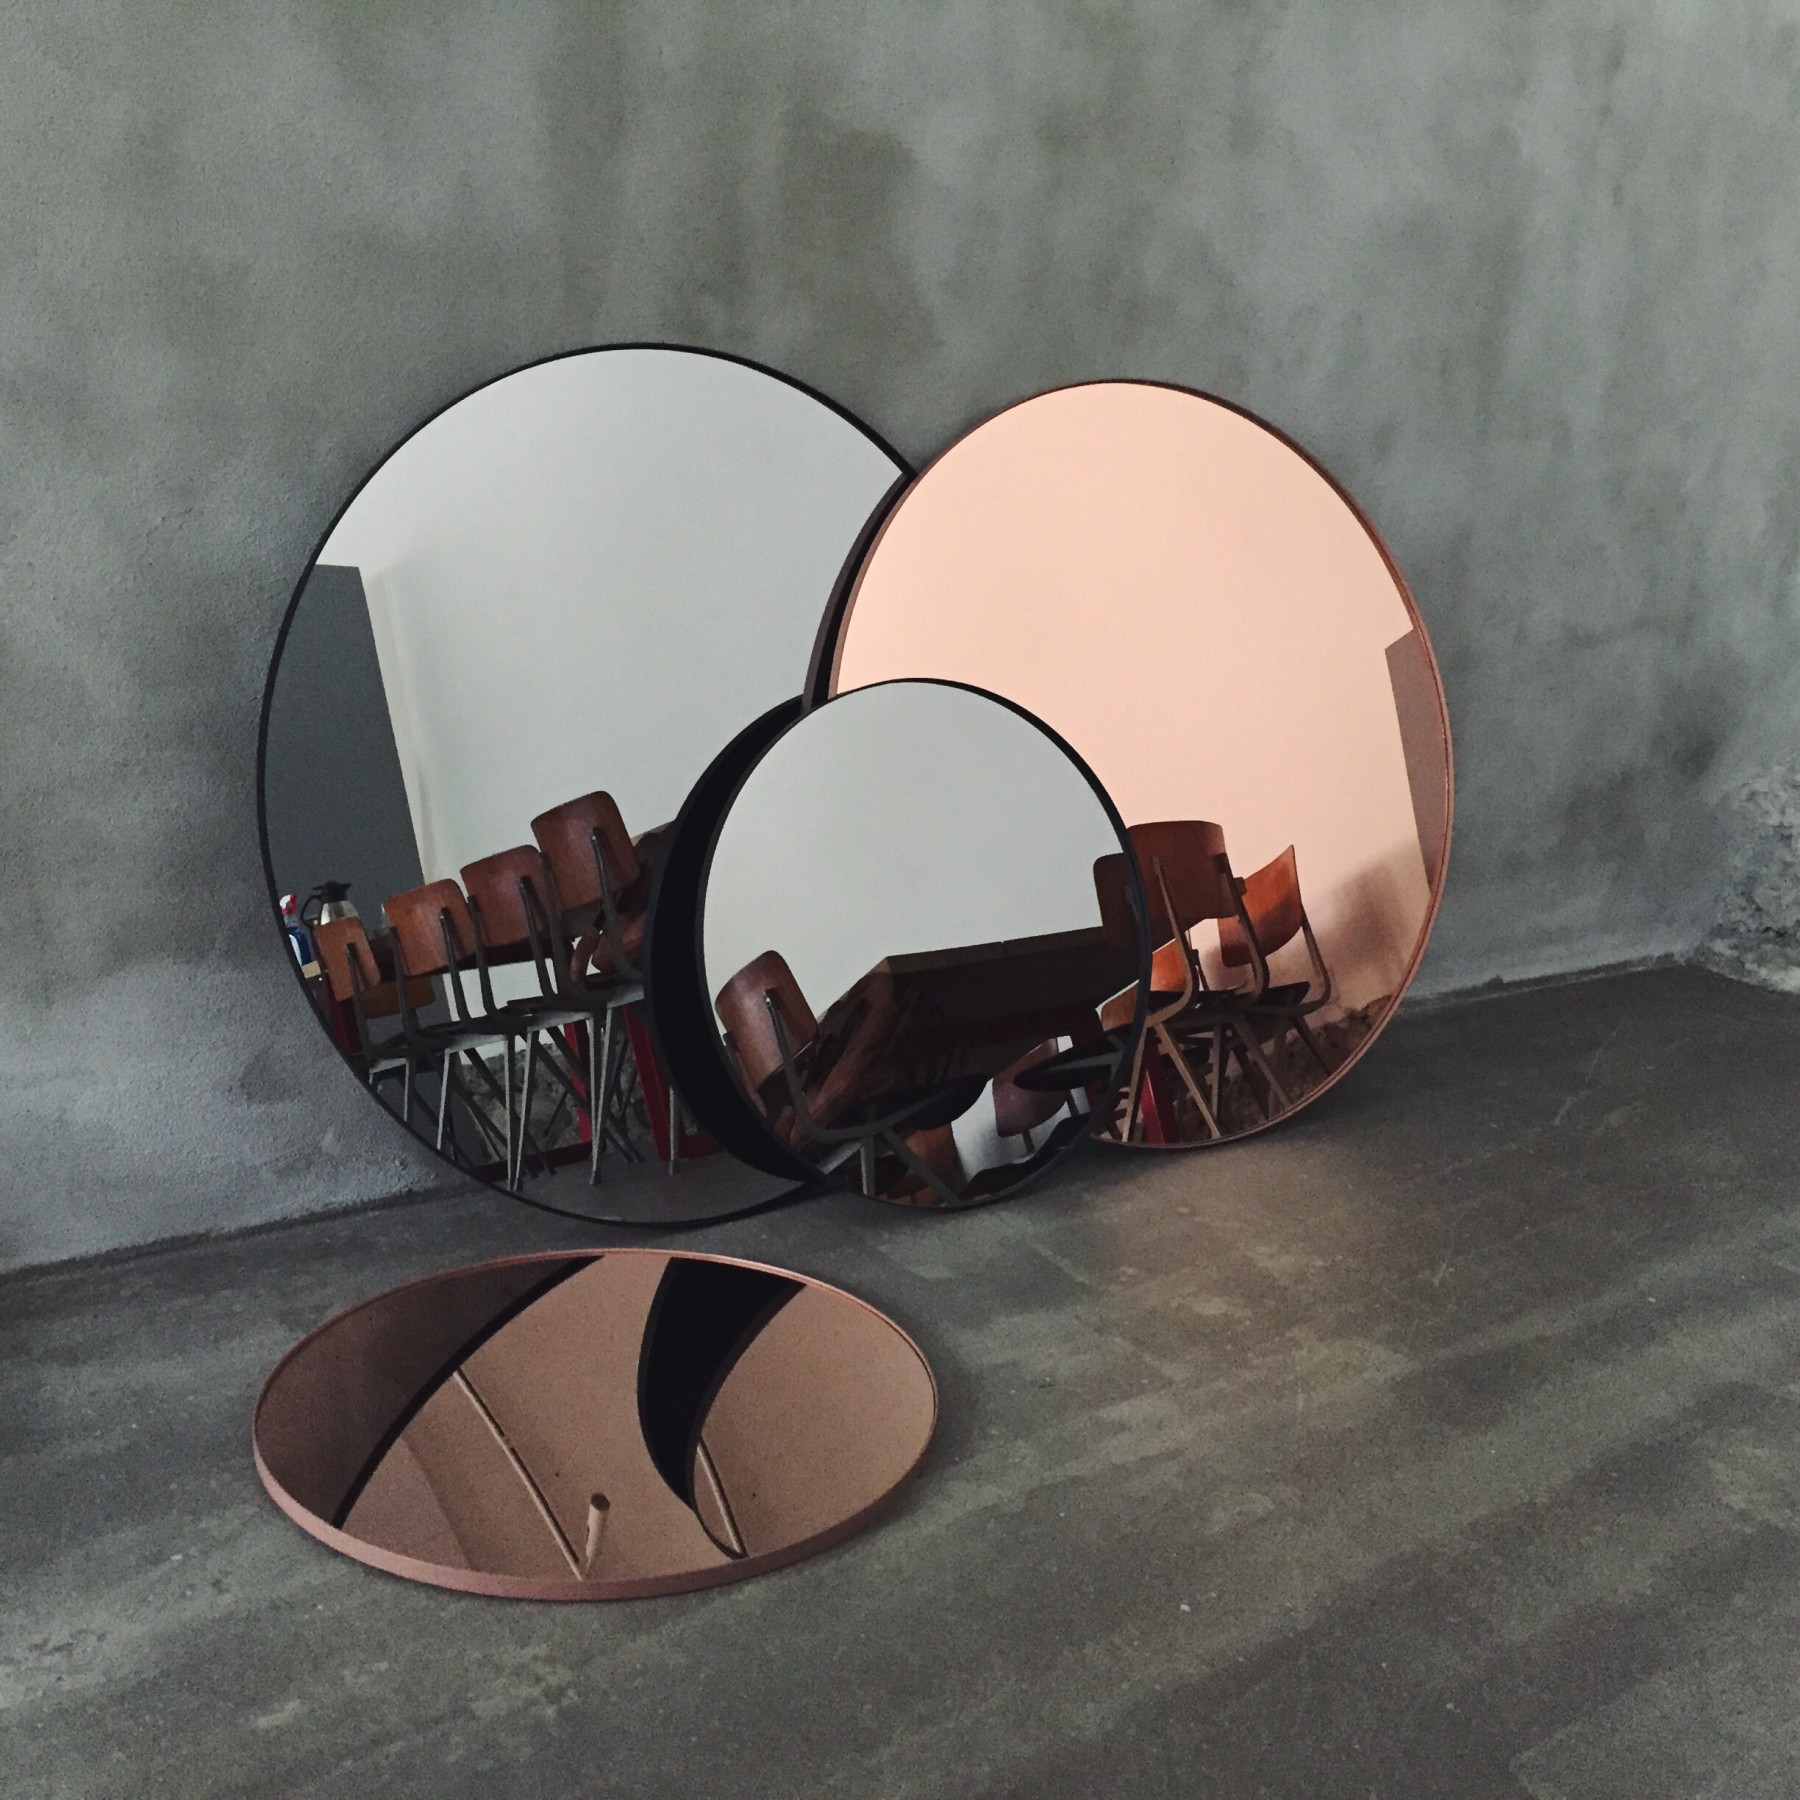 Unique Mirrors: Reflections Of Style And Personality